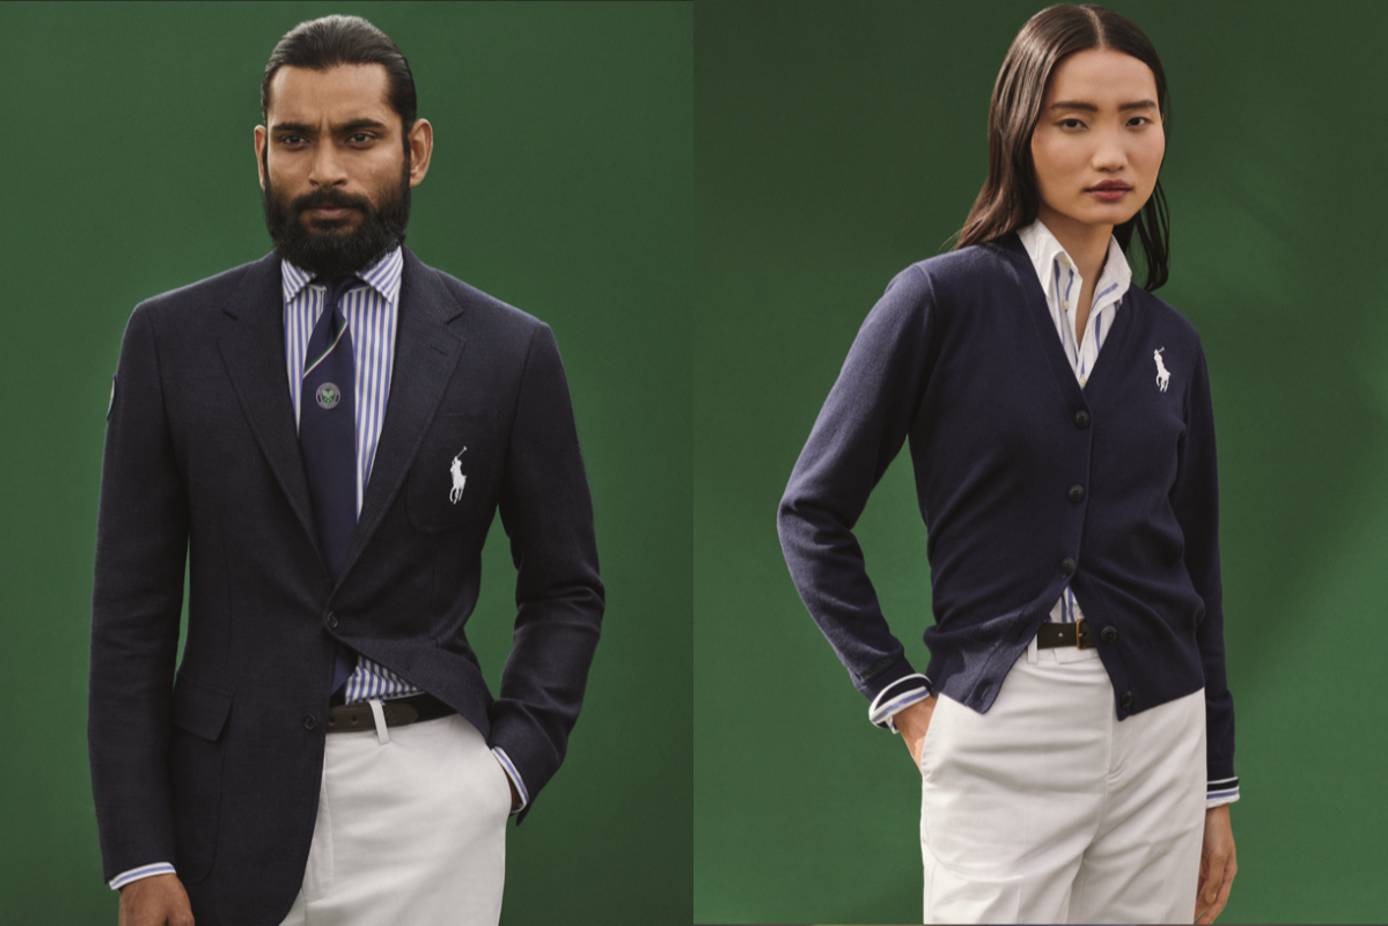 https://fashionunited.com/r/fit=cover,format=auto,gravity=center,height=926,quality=70,width=1388/https://fashionunited.com/img/upload/2022/06/24/polo-ralph-lauren-wimbledon-g4qqiv2m-2022-06-24.png